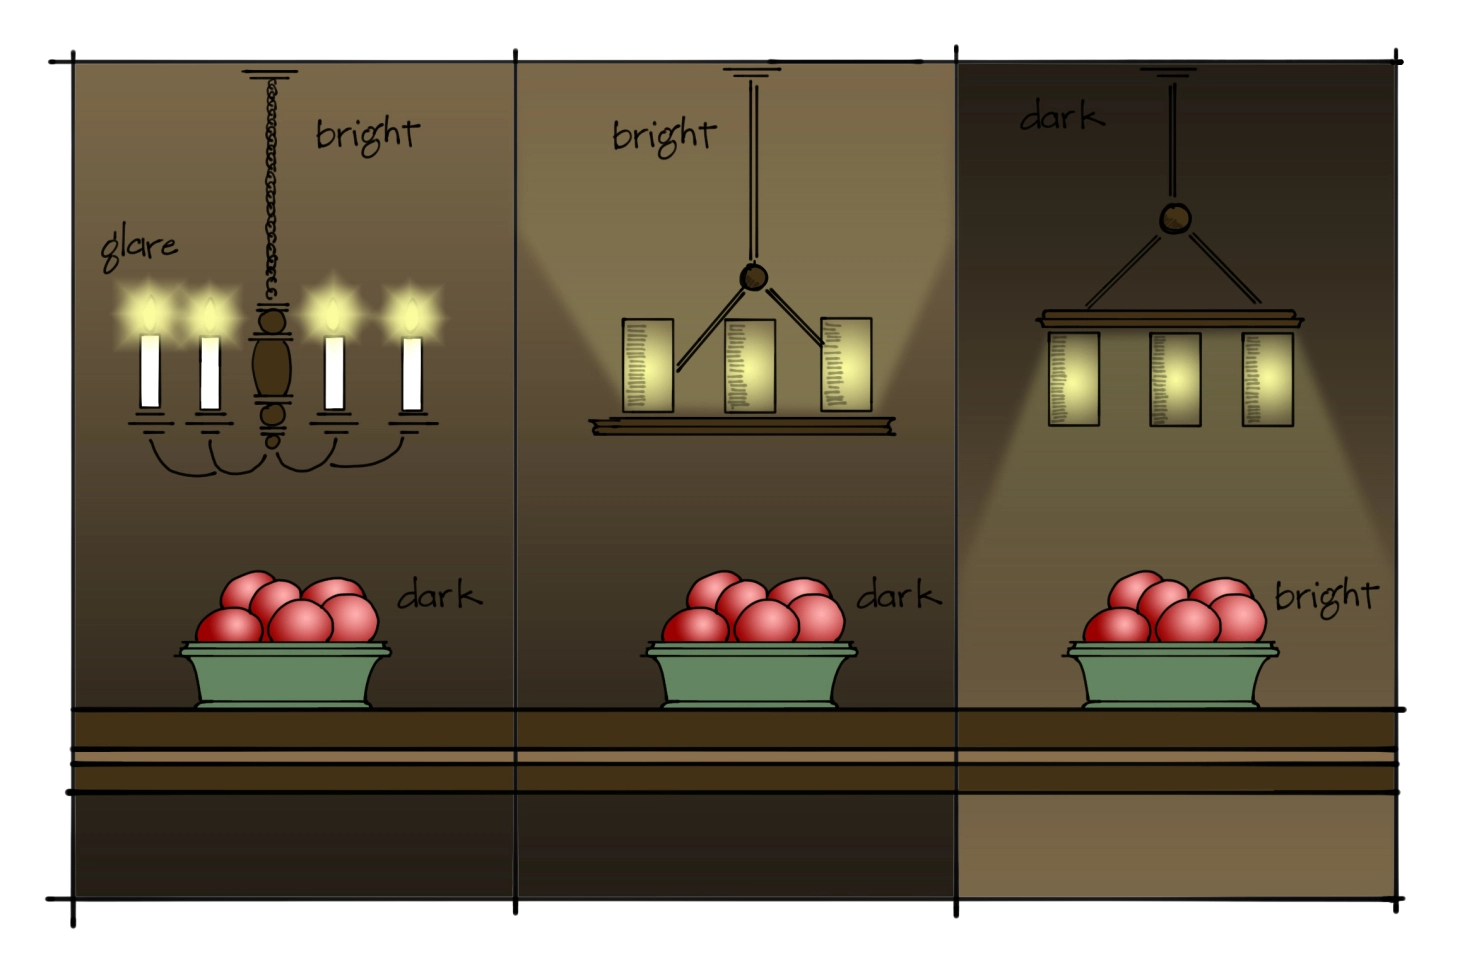 An illustration of a table with a candle style chandelier labelled "glare and bright" with a bowl of fruit labelled "dark" on the left. In the middle is an uplight chandelier labelled "bright" and a bowl of fruit labelled "dark". On the right is a downlight chandelier with the space above it labelled "dark" and the fruit on the table labelled "bright".